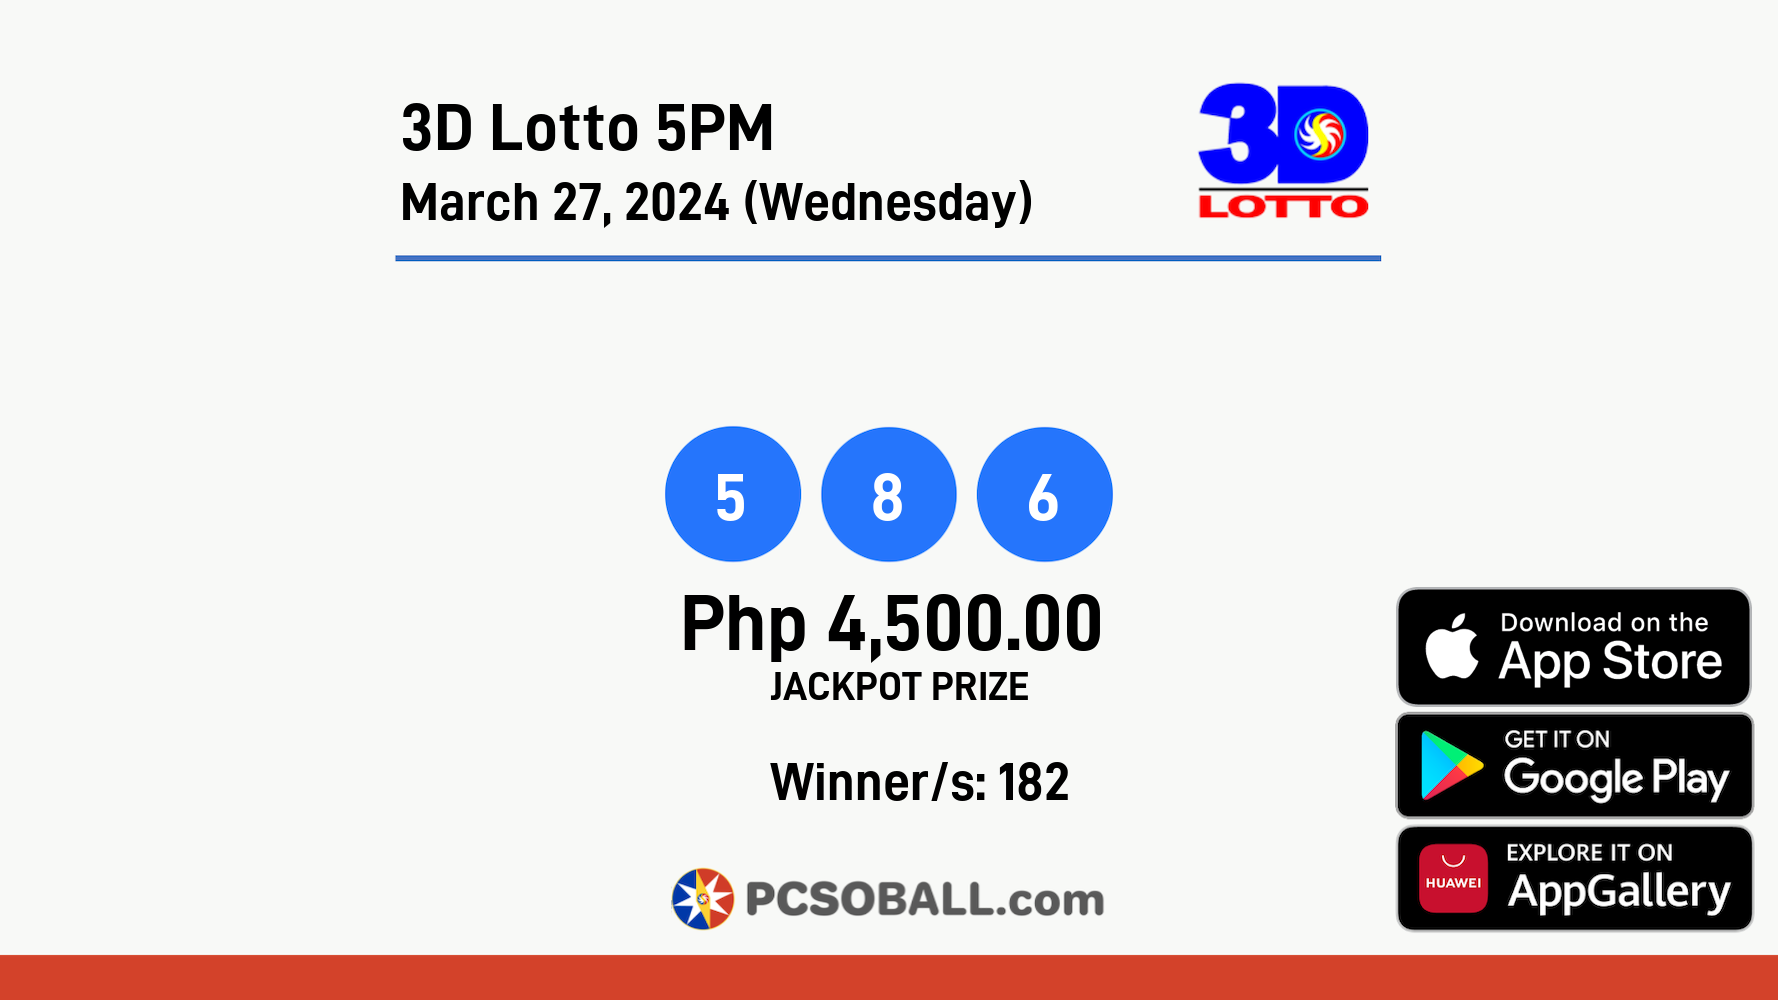 3D Lotto 5PM March 27, 2024 (Wednesday) Result